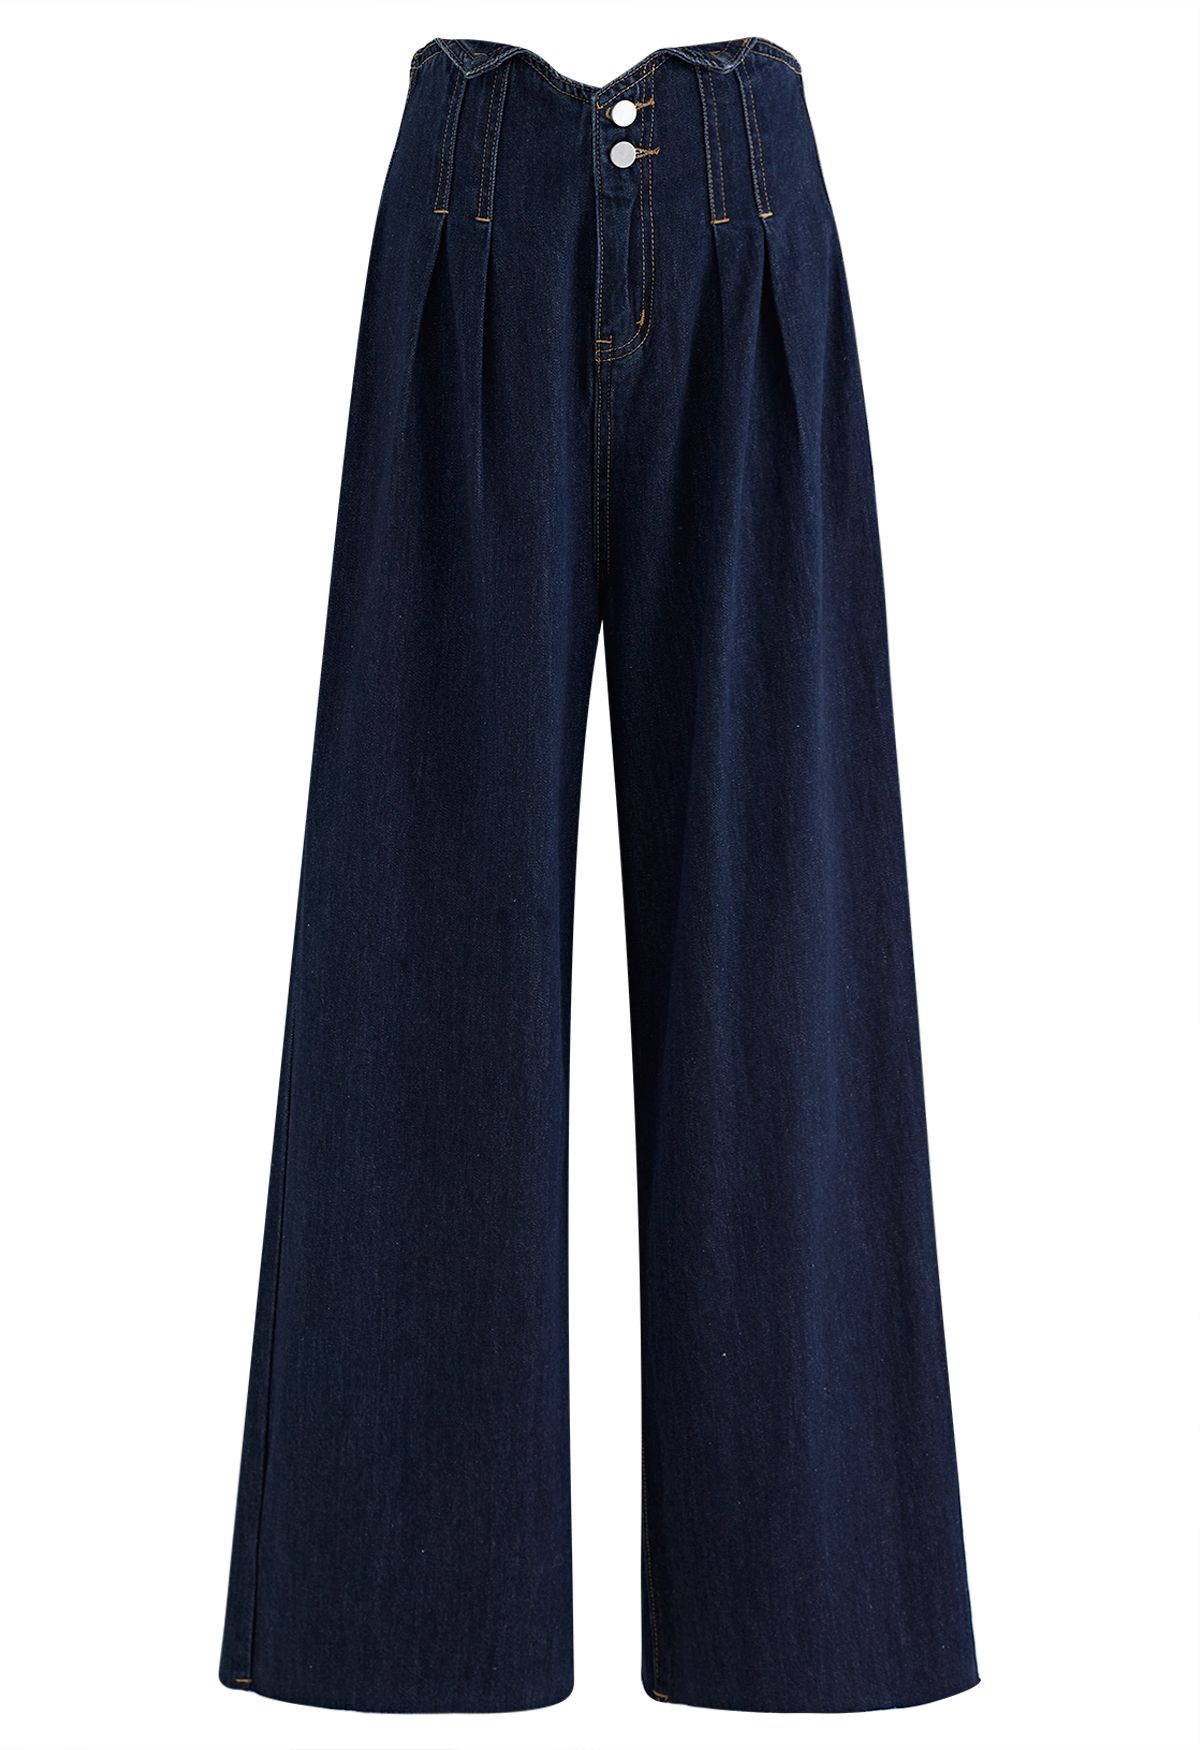 Notched Edge Pleated Wide-Leg Jeans in Navy